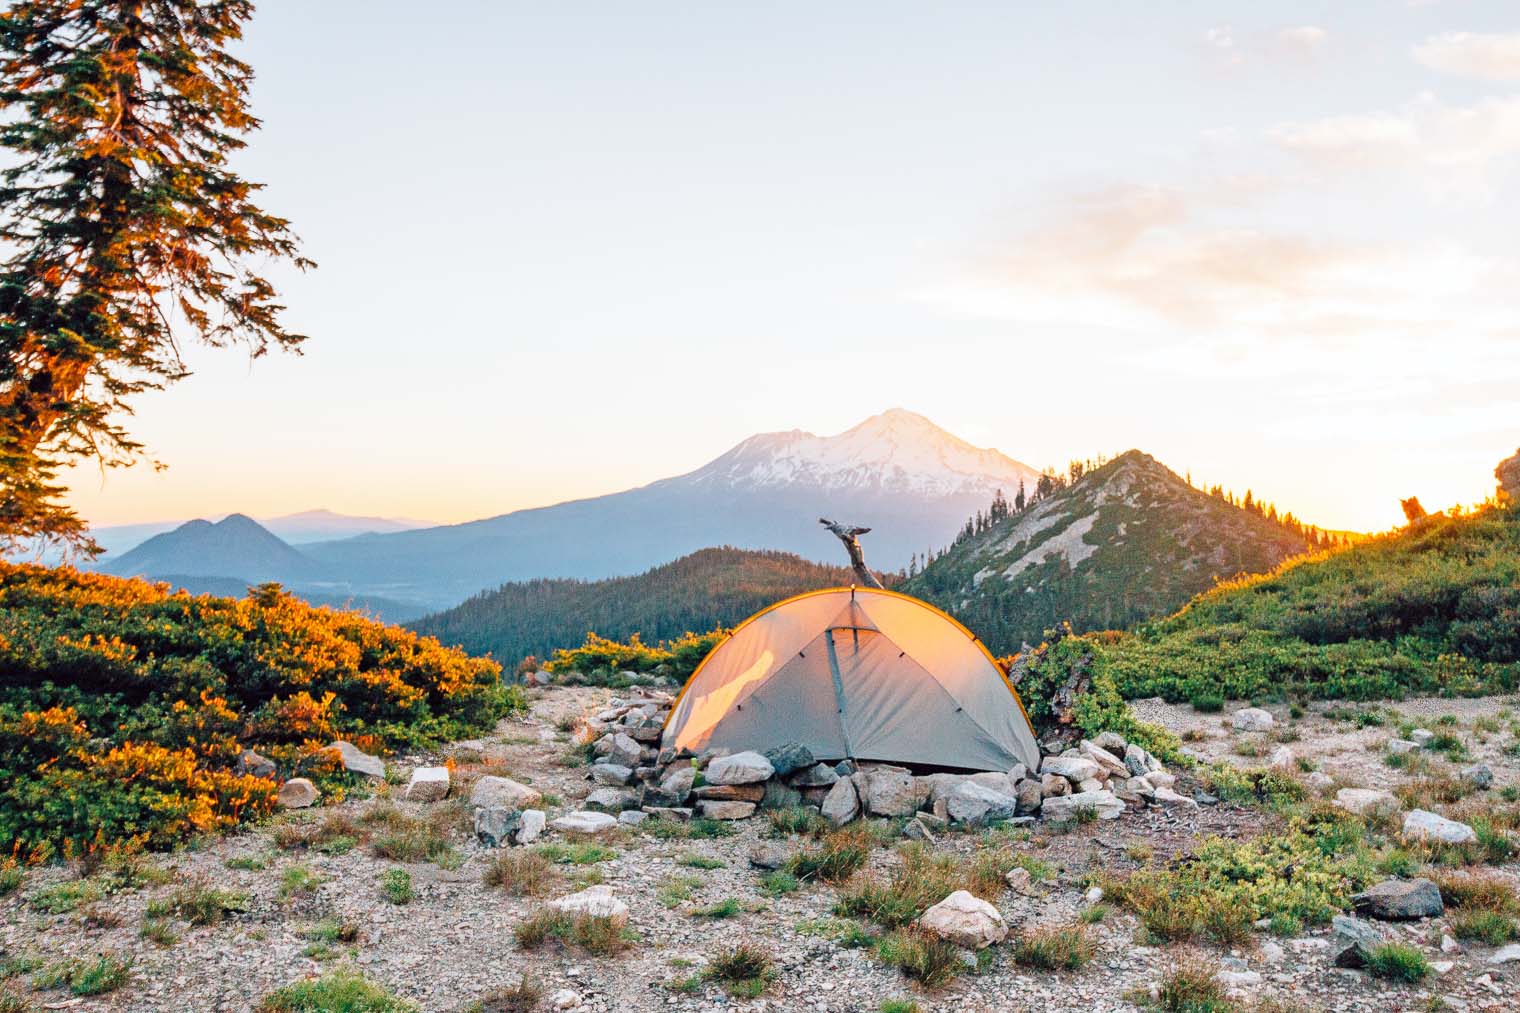 A backpacking tent set up with Mount Shasta in the distance